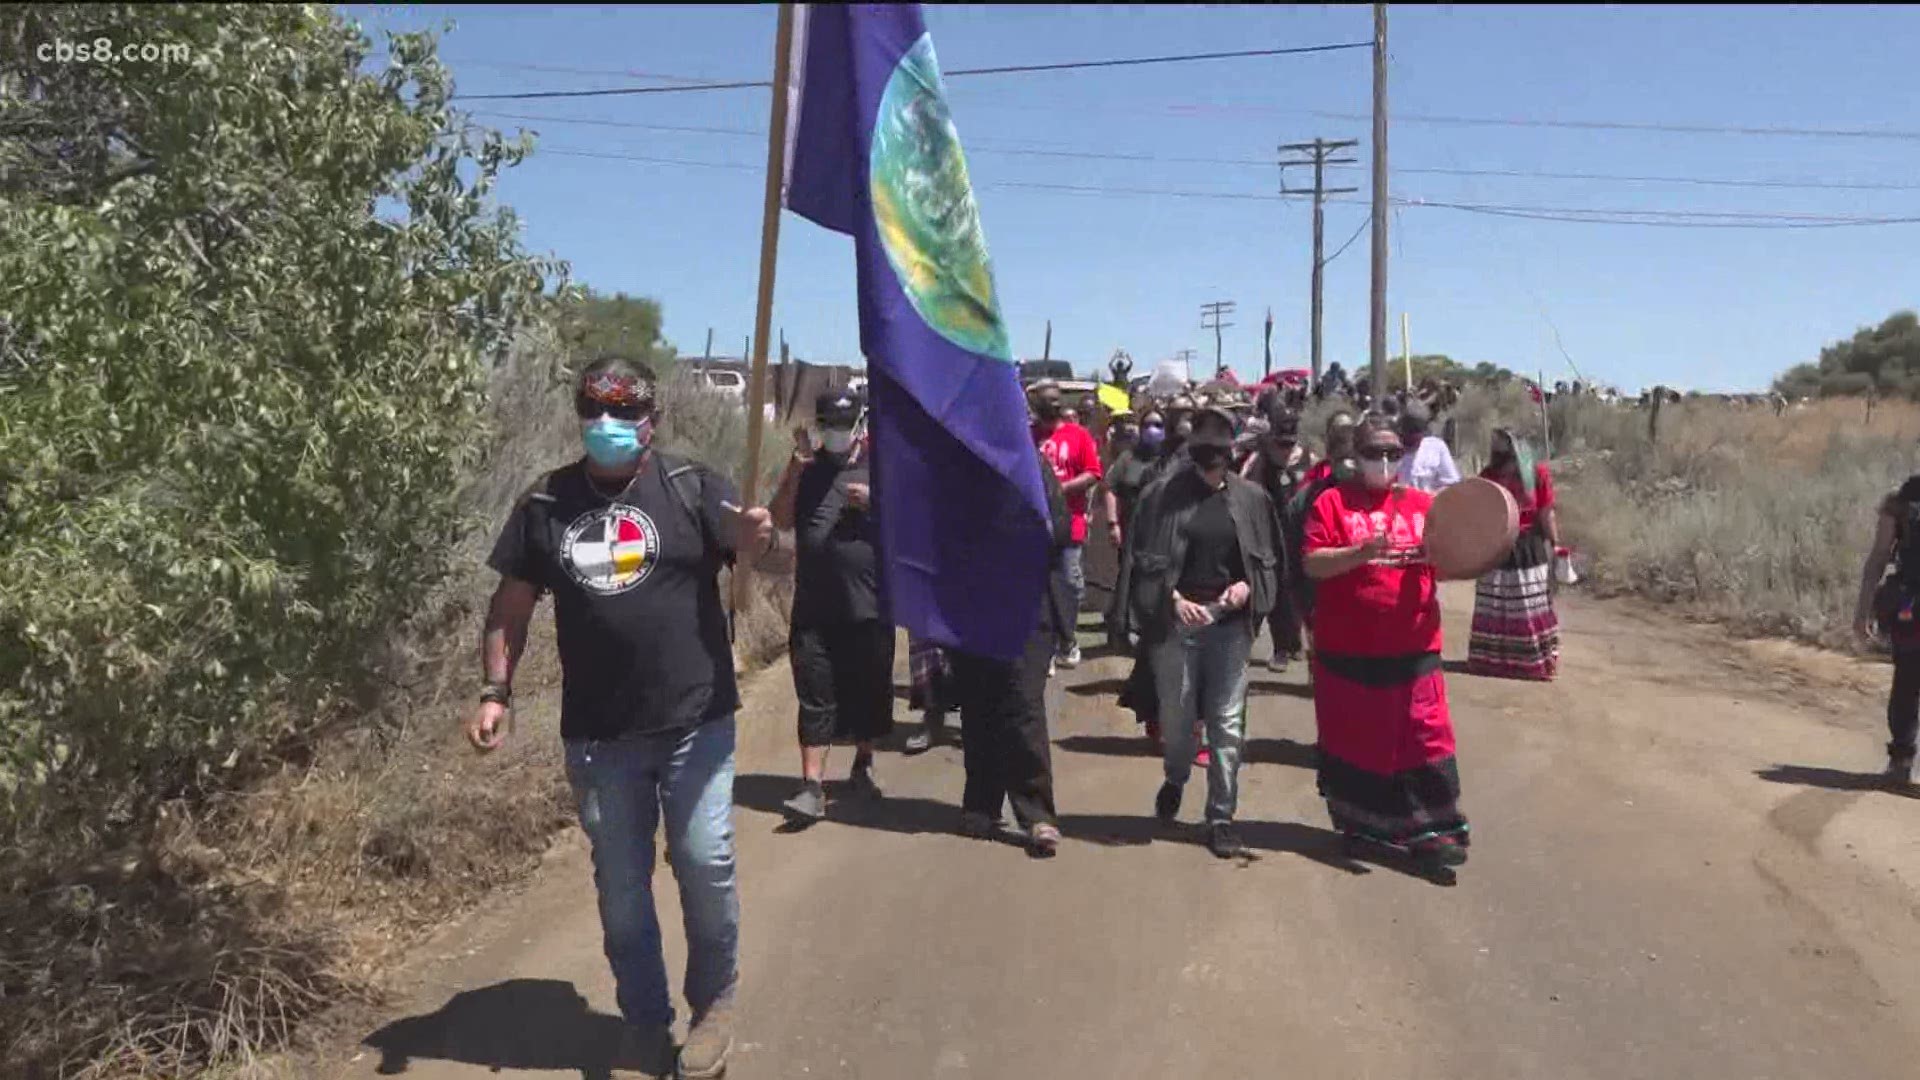 Members of the Kumeyaay Tribe are concerned their ancestors may be buried where the blasting is taking place.